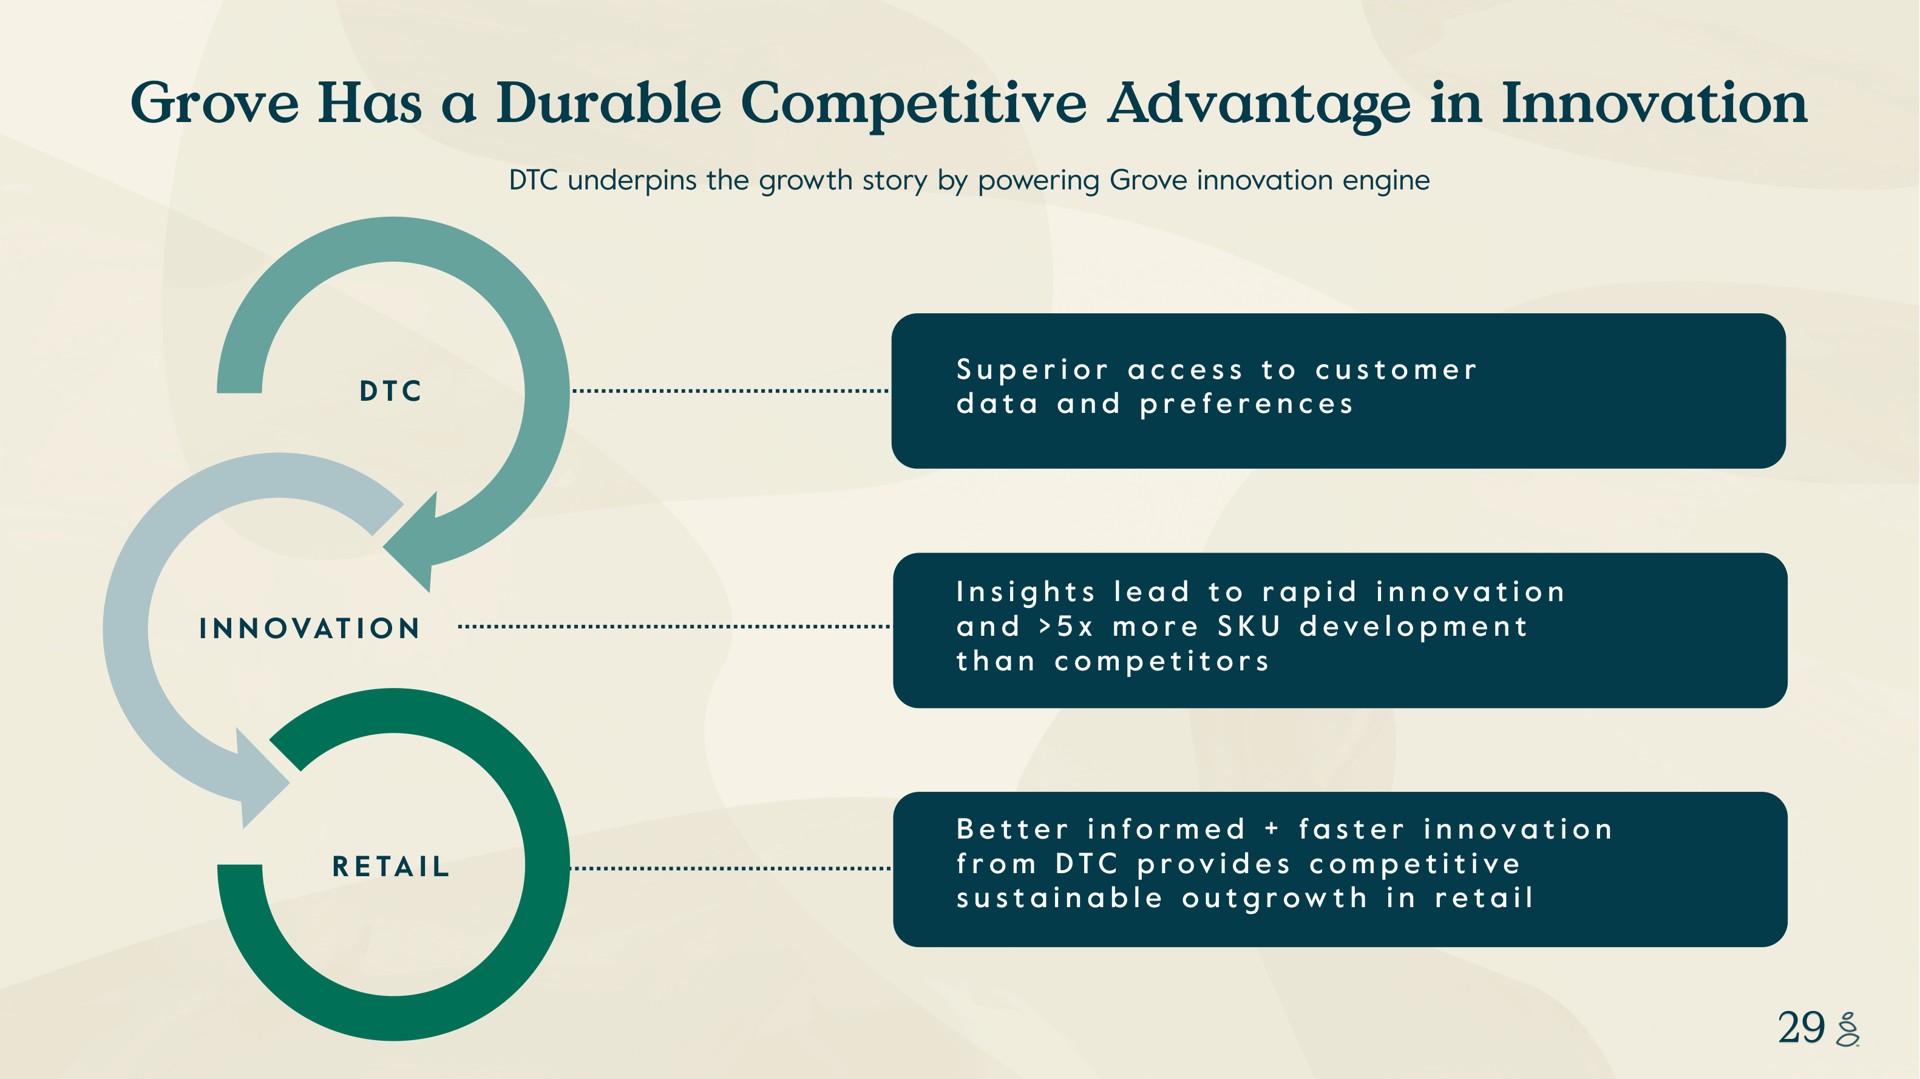 grove has a durable competitive advantage in innovation underpins the growth story by powering engine superior access to customer data and preferences insights lead to rapid and more development than competitors better informed faster from provides sustainable outgrowth retail retail | Grove